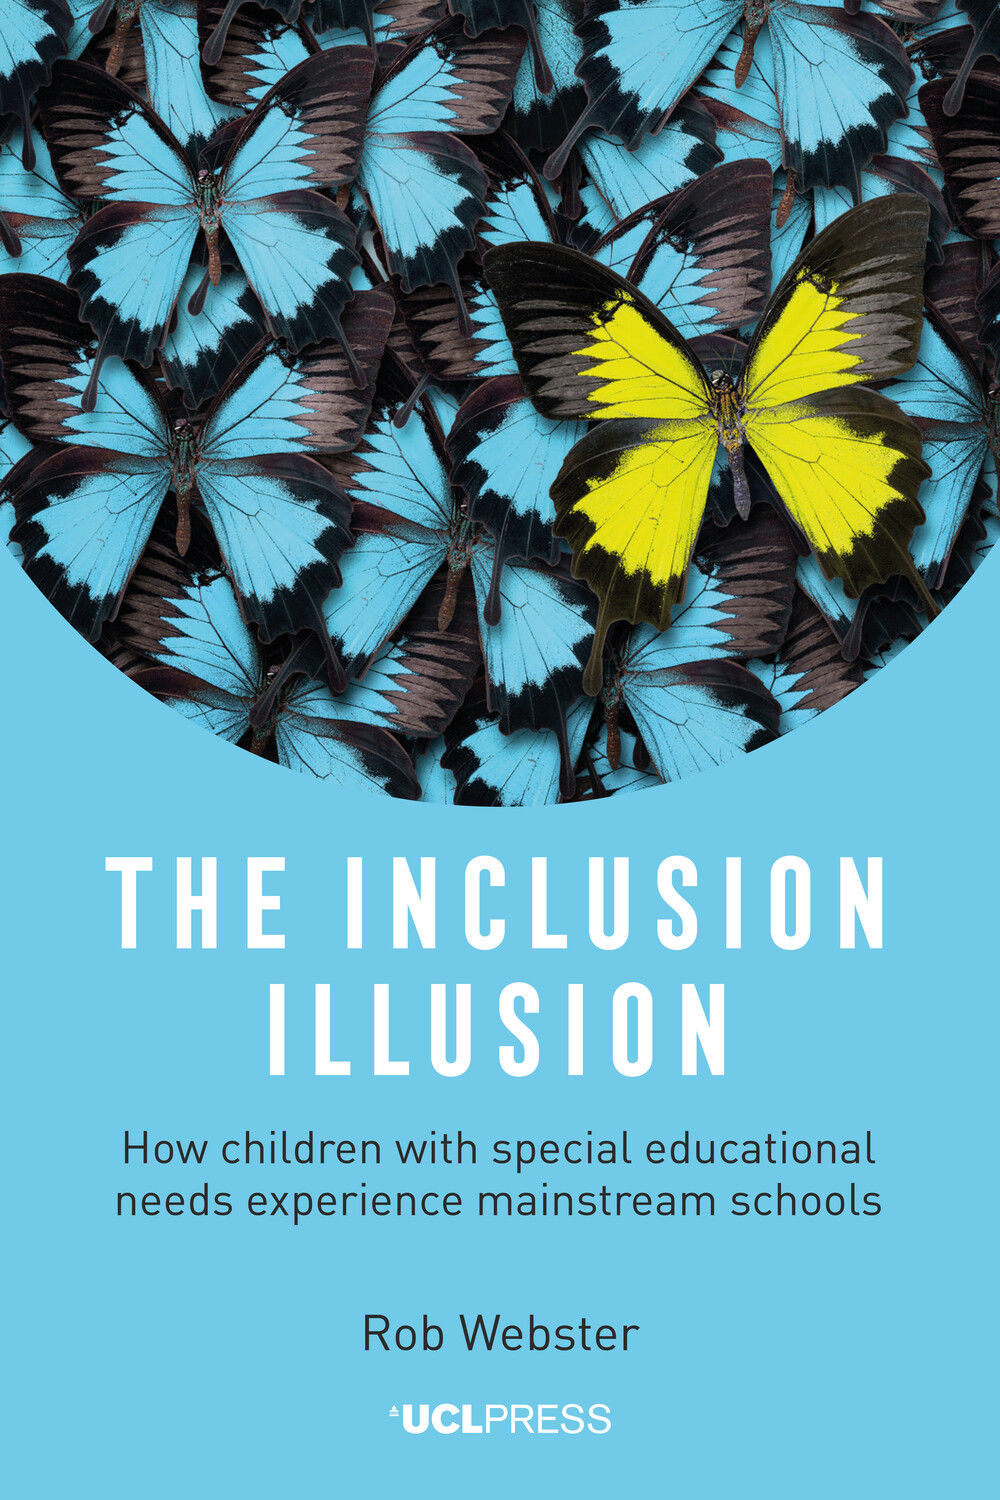 Image The inclusion illusion : how children with special educational needs experience mainstream schools